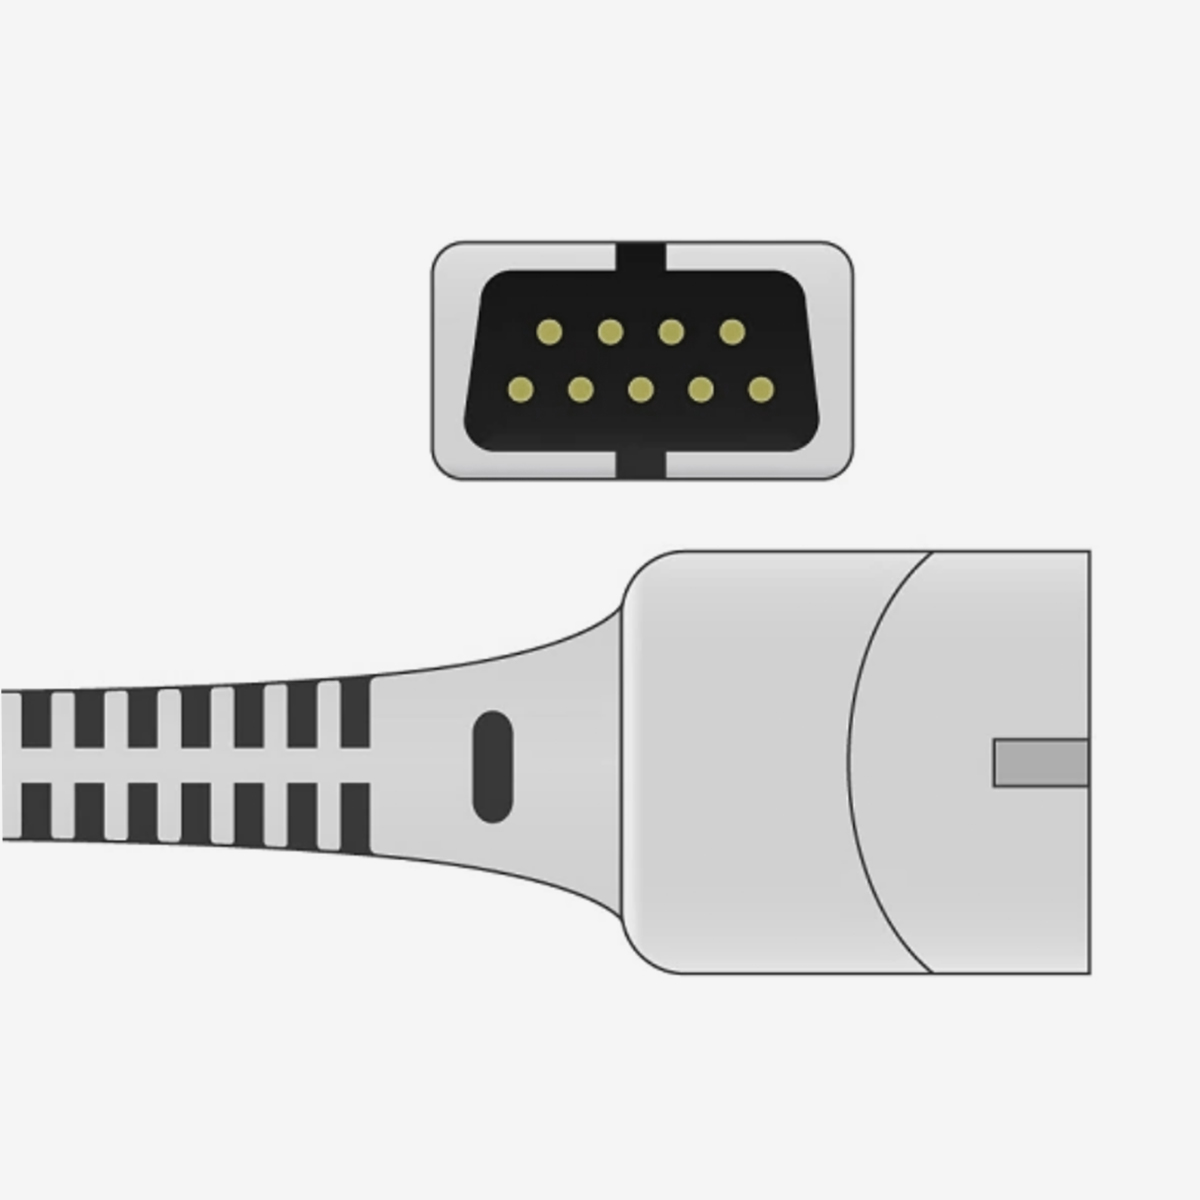 Illustration of 9 pin connector for Nellcor neonatal disposable finger clip